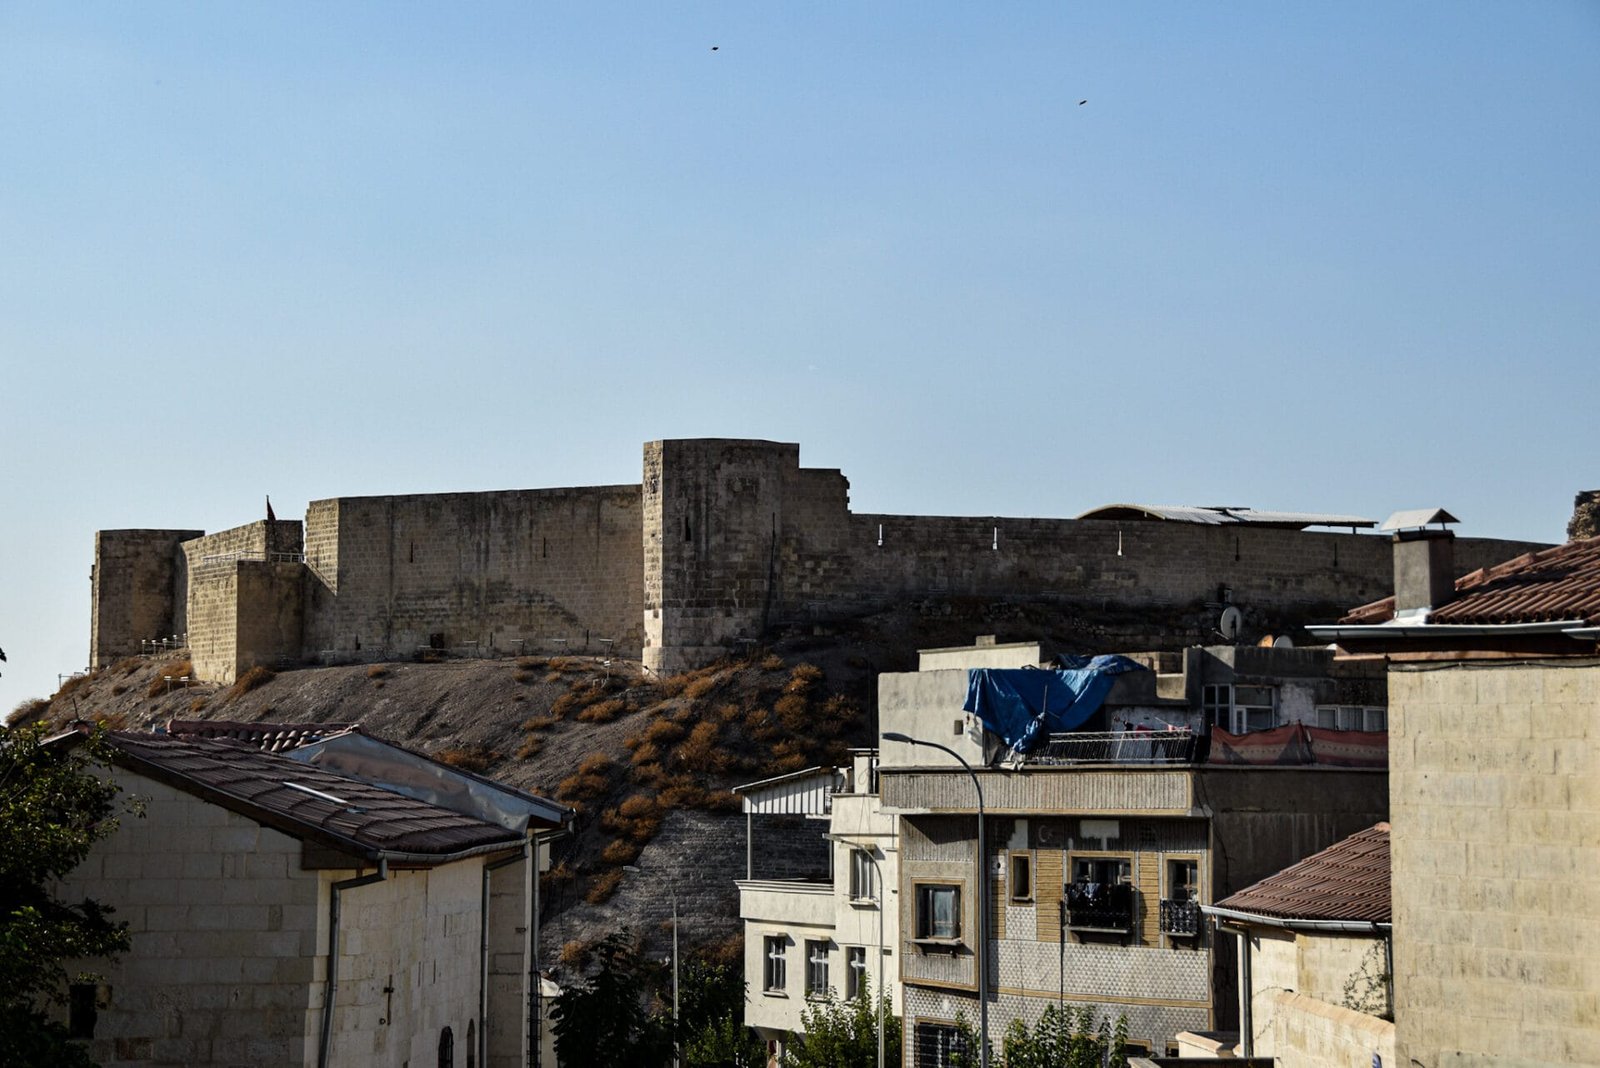 the ramparts of Gazaintep castle rise above the roofs of the old town